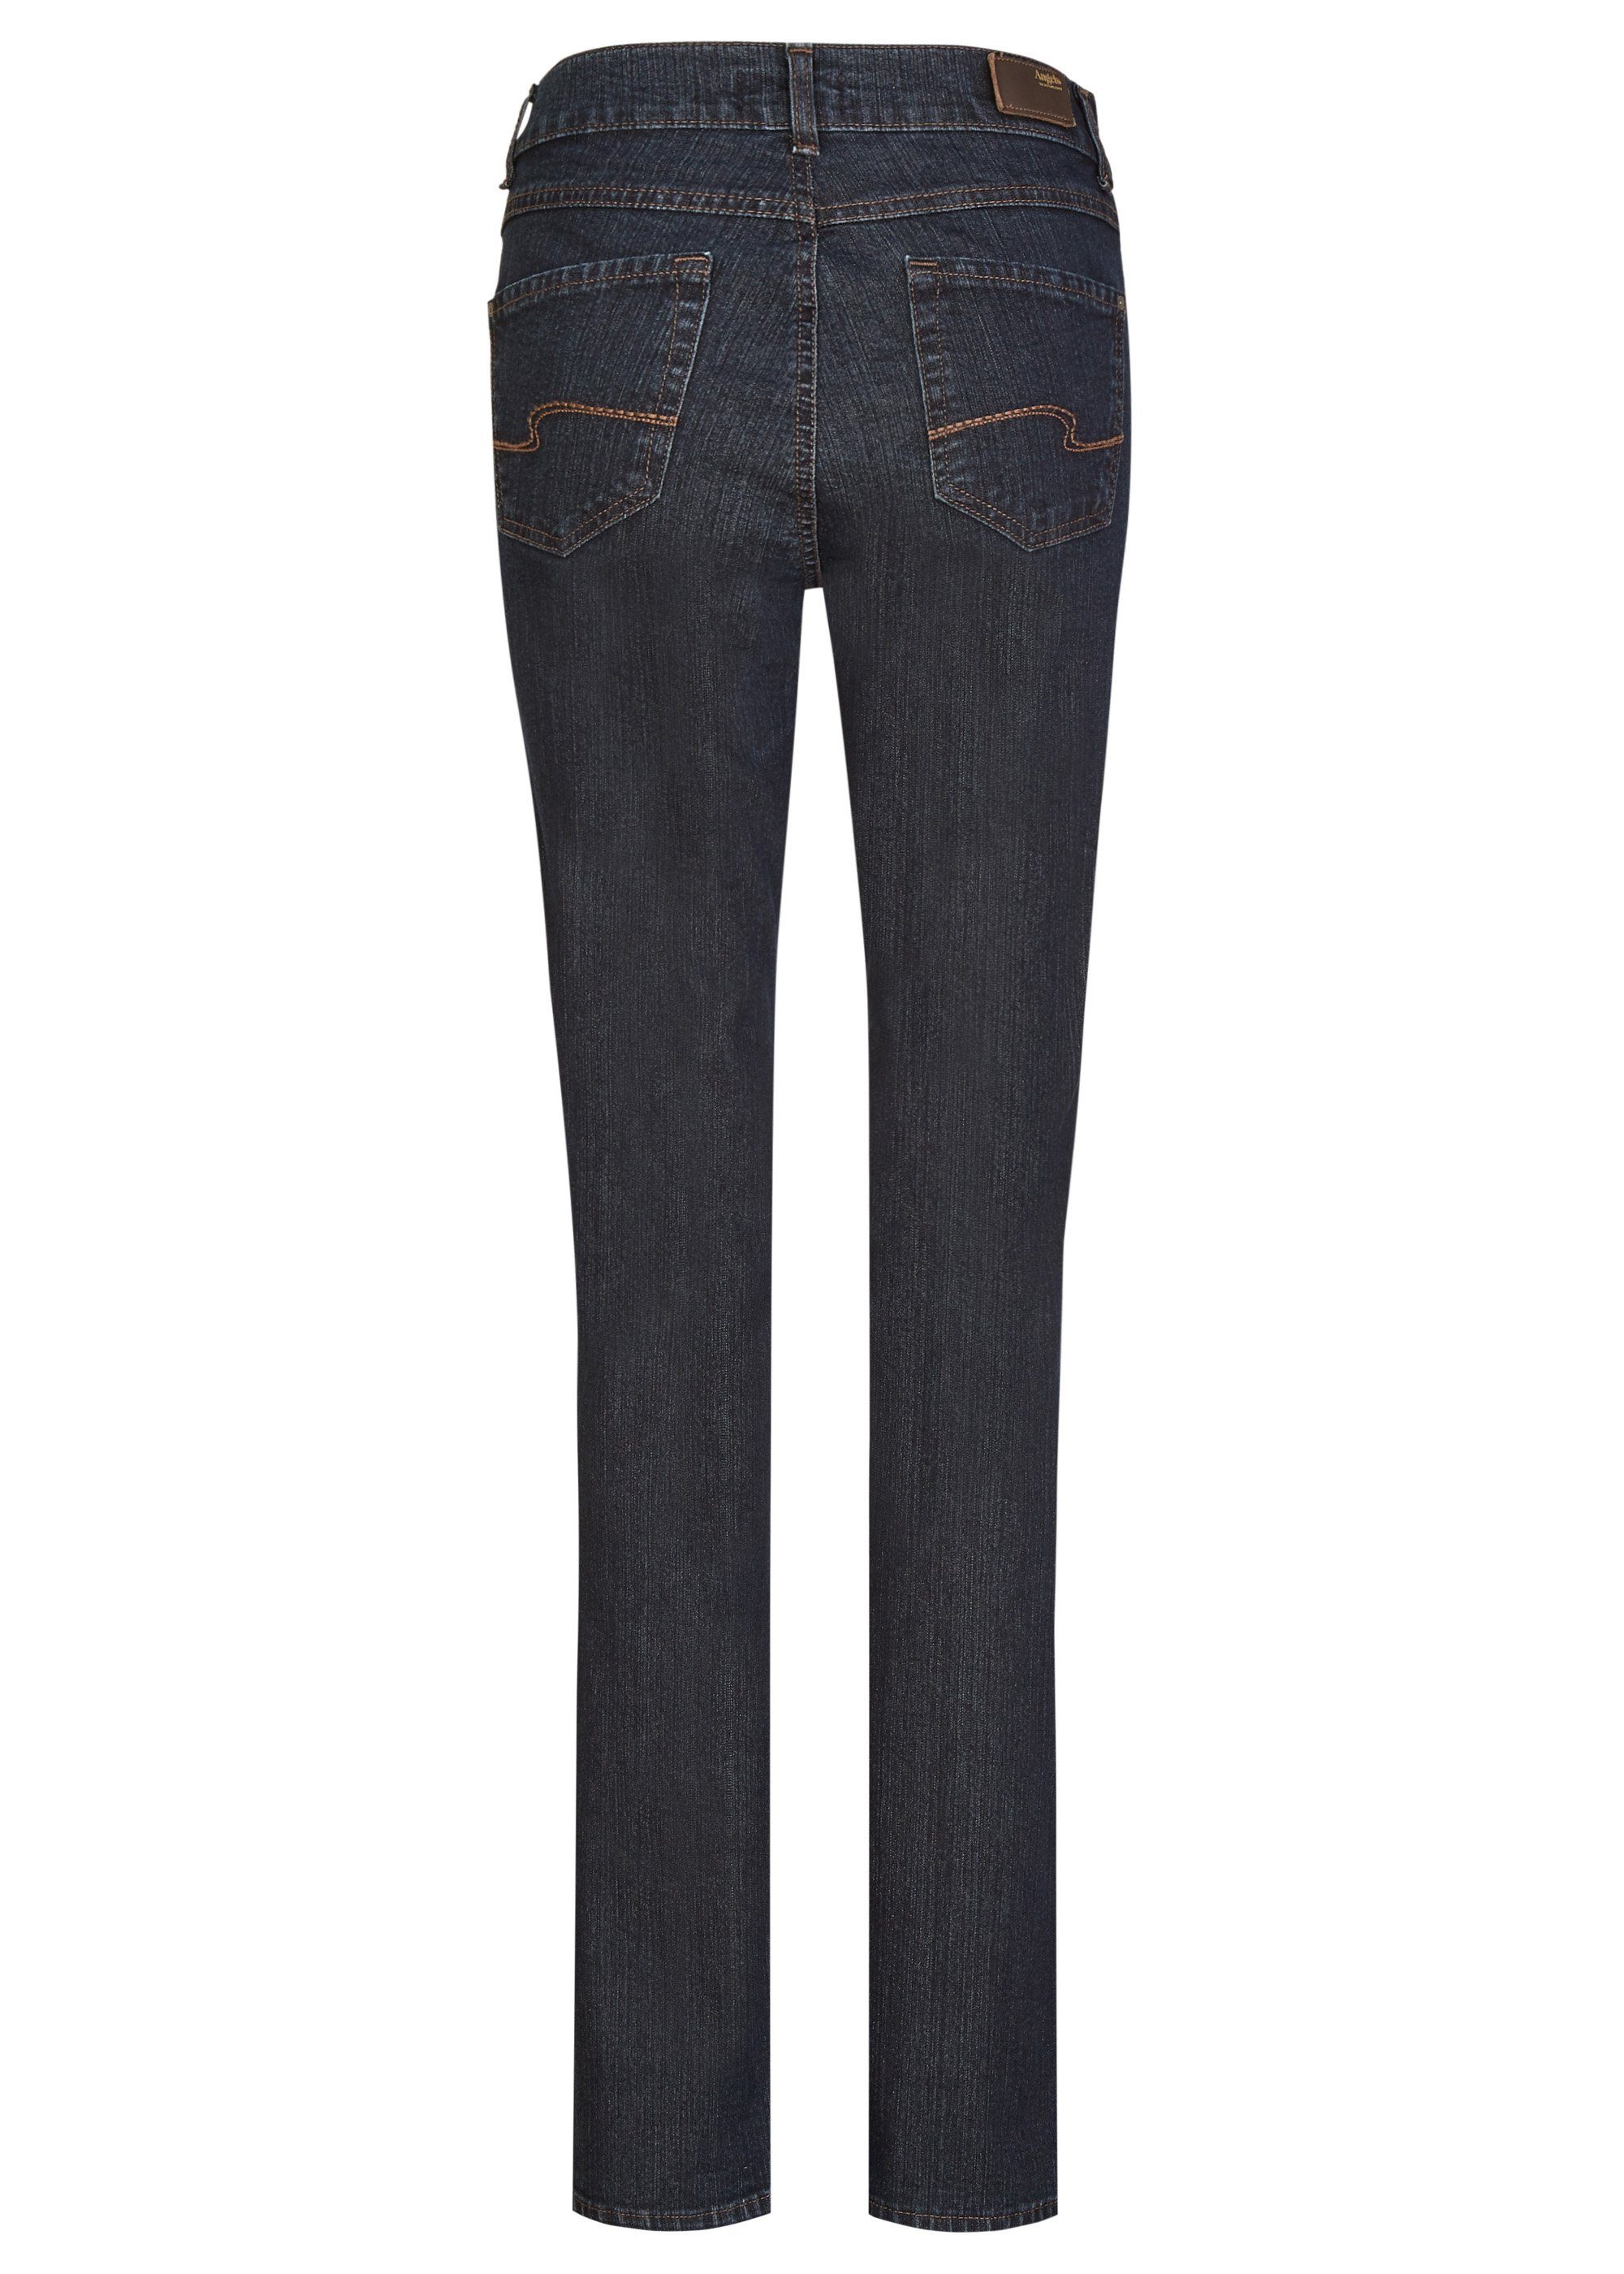 ANGELS Stretch-Jeans 90.30 LUCI ANGELS JEANS night 53 blue